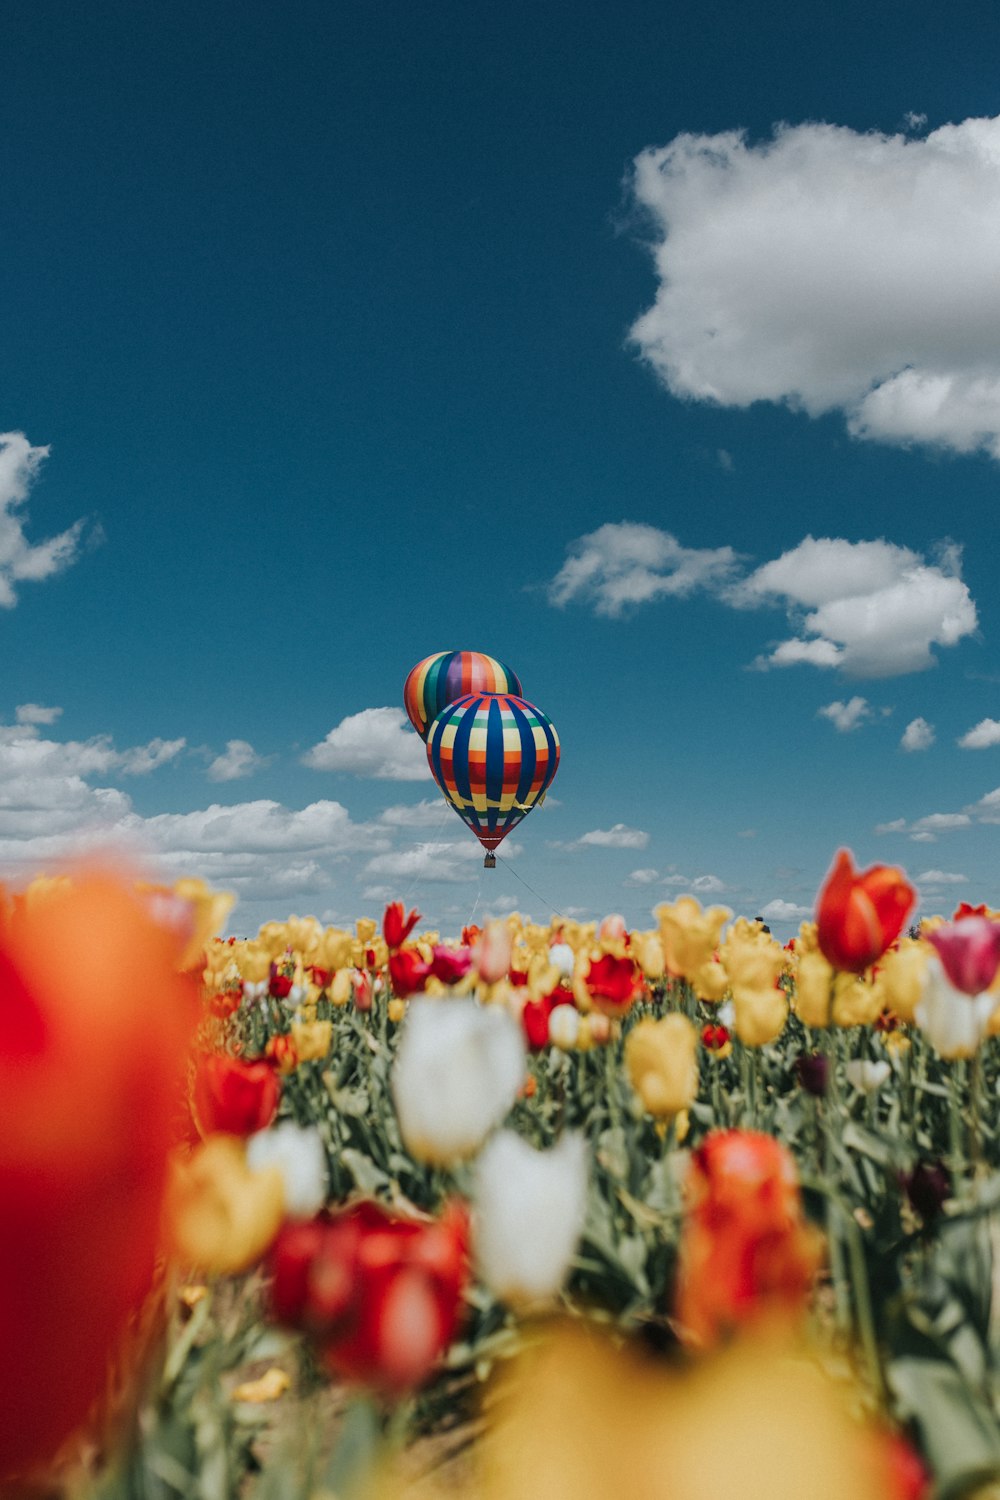 yellow and red tulip flowers under hot air balloons